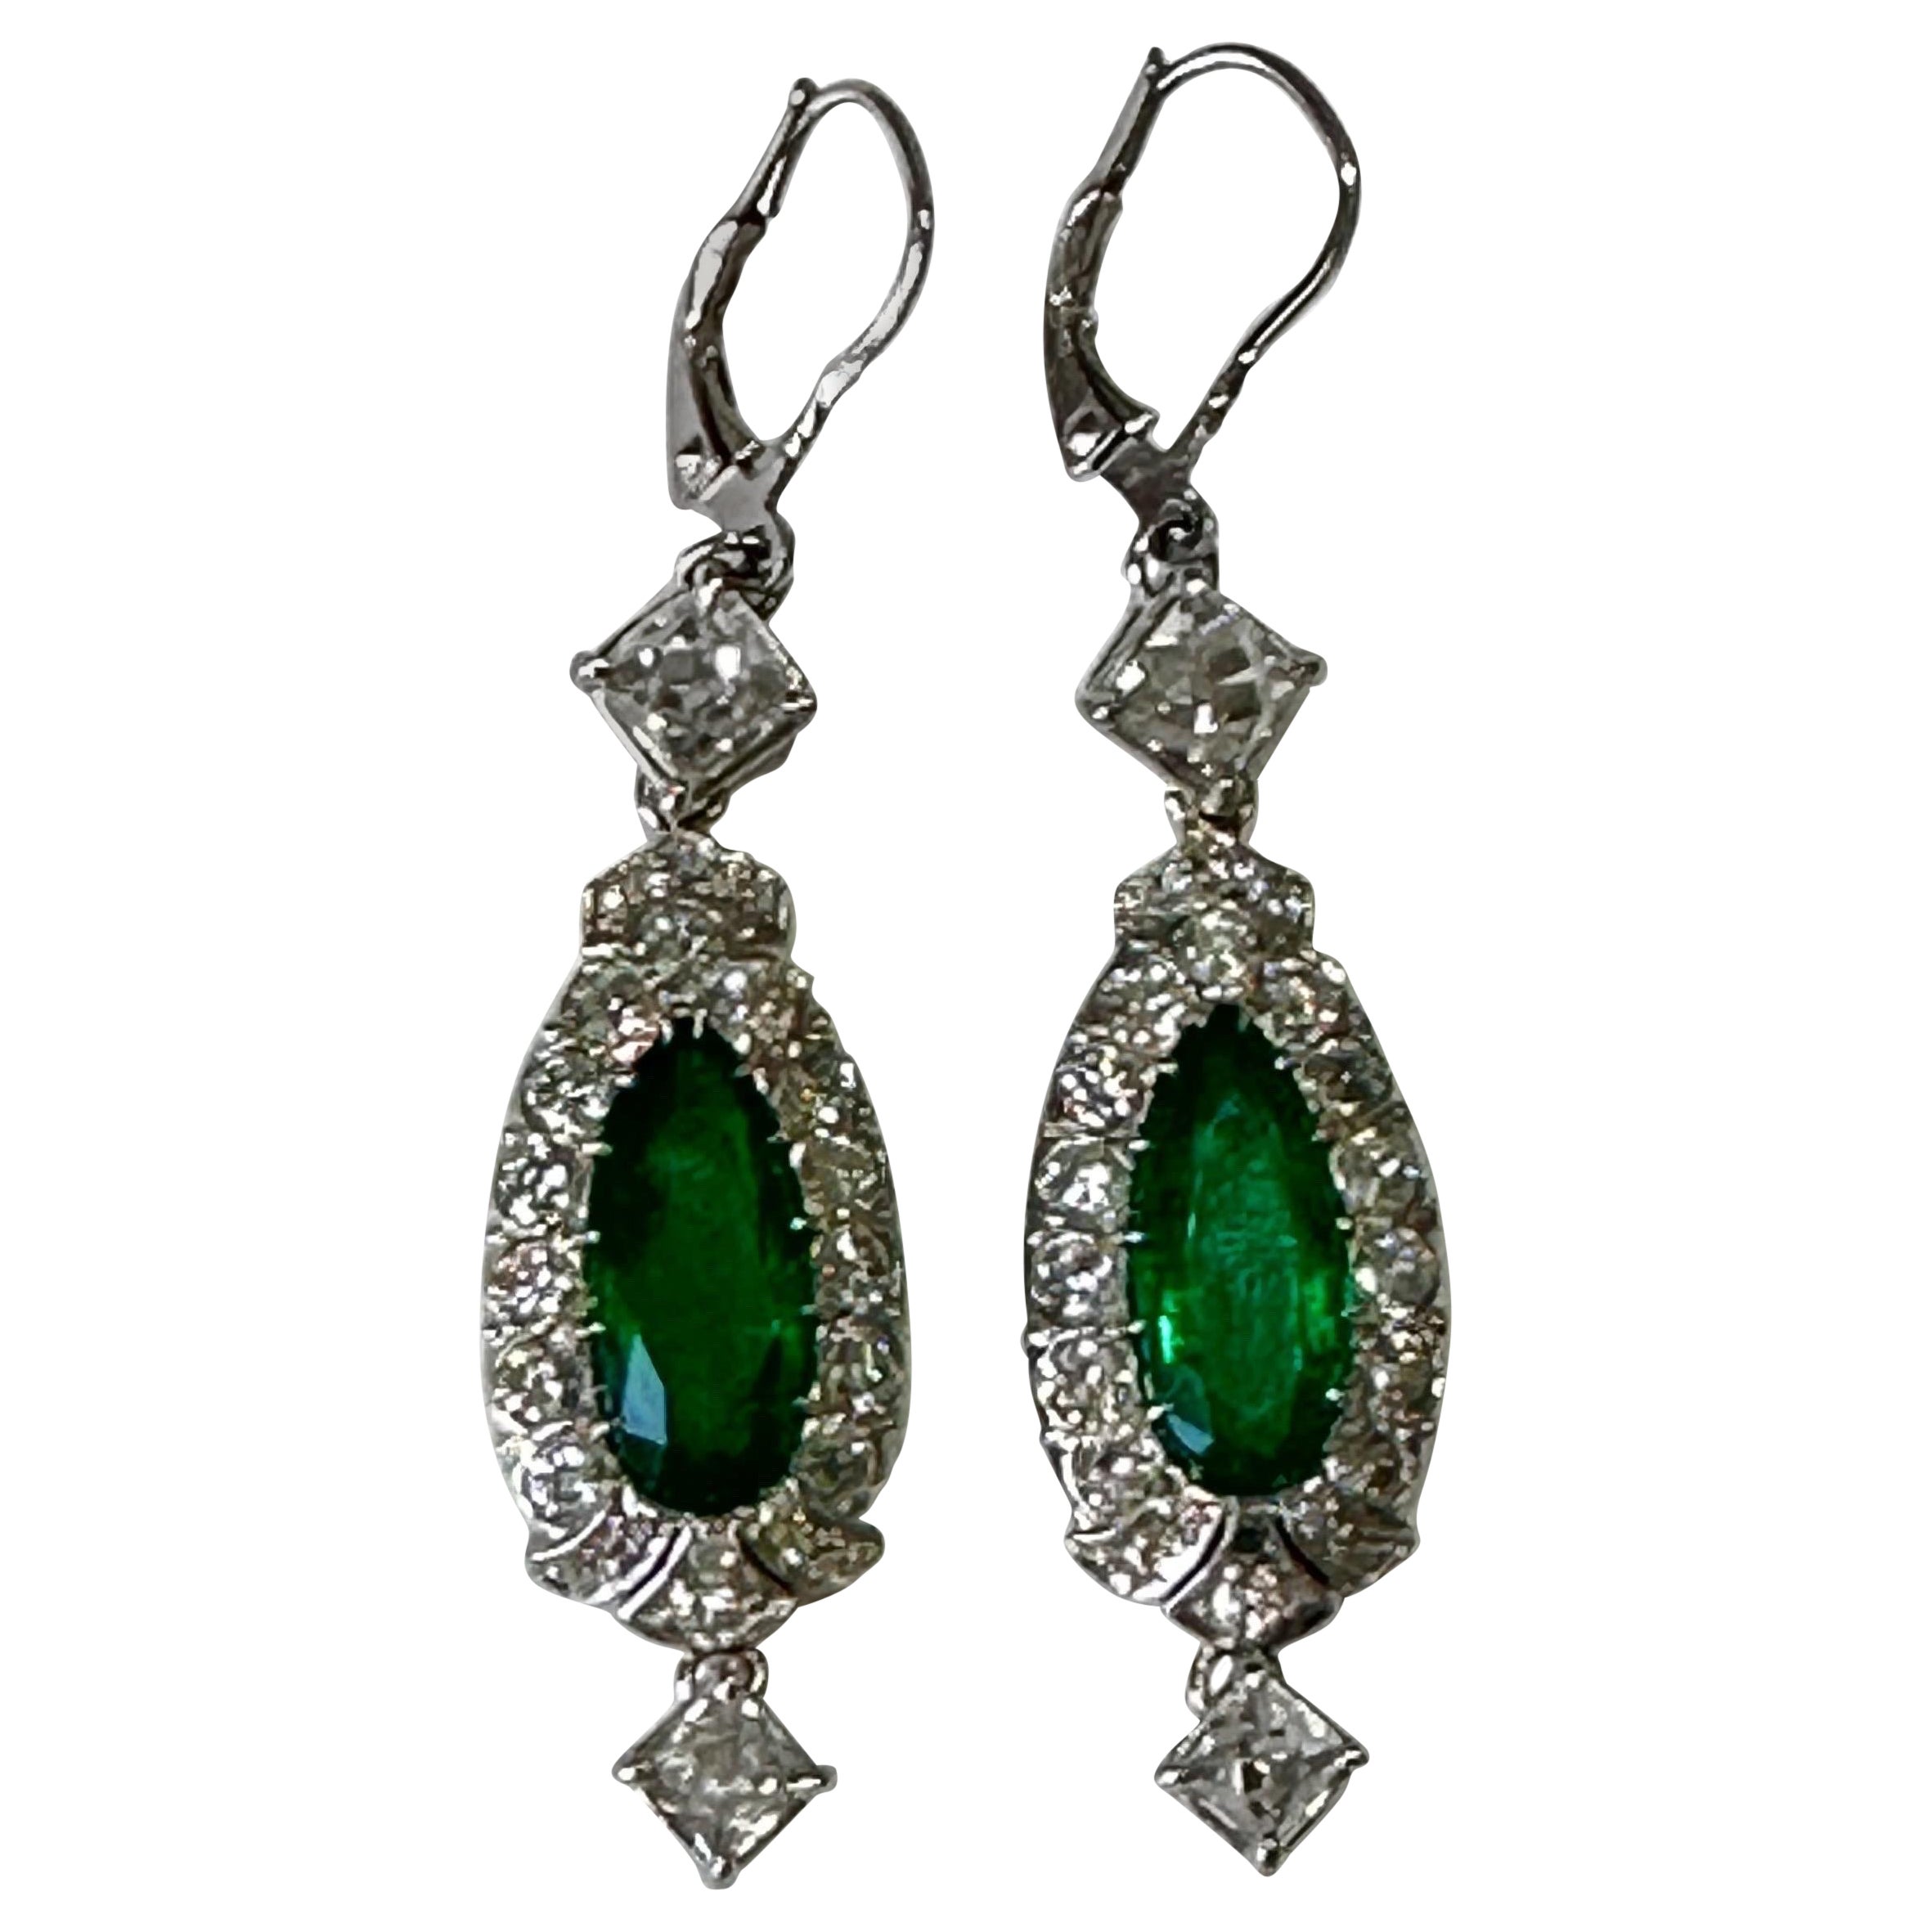 Exquisite one of a kind Mindi Mond Emerald french cut drops…
2 Pear Mixed Cut Colombian Emeralds = approx. 4.15 carats total
Origin: Colombia, Treatment: Minor oil
AGL Report: 1107349A&B

2 Top French Cut Diamonds= approx. 1.96 CTW 
2 Bottom French